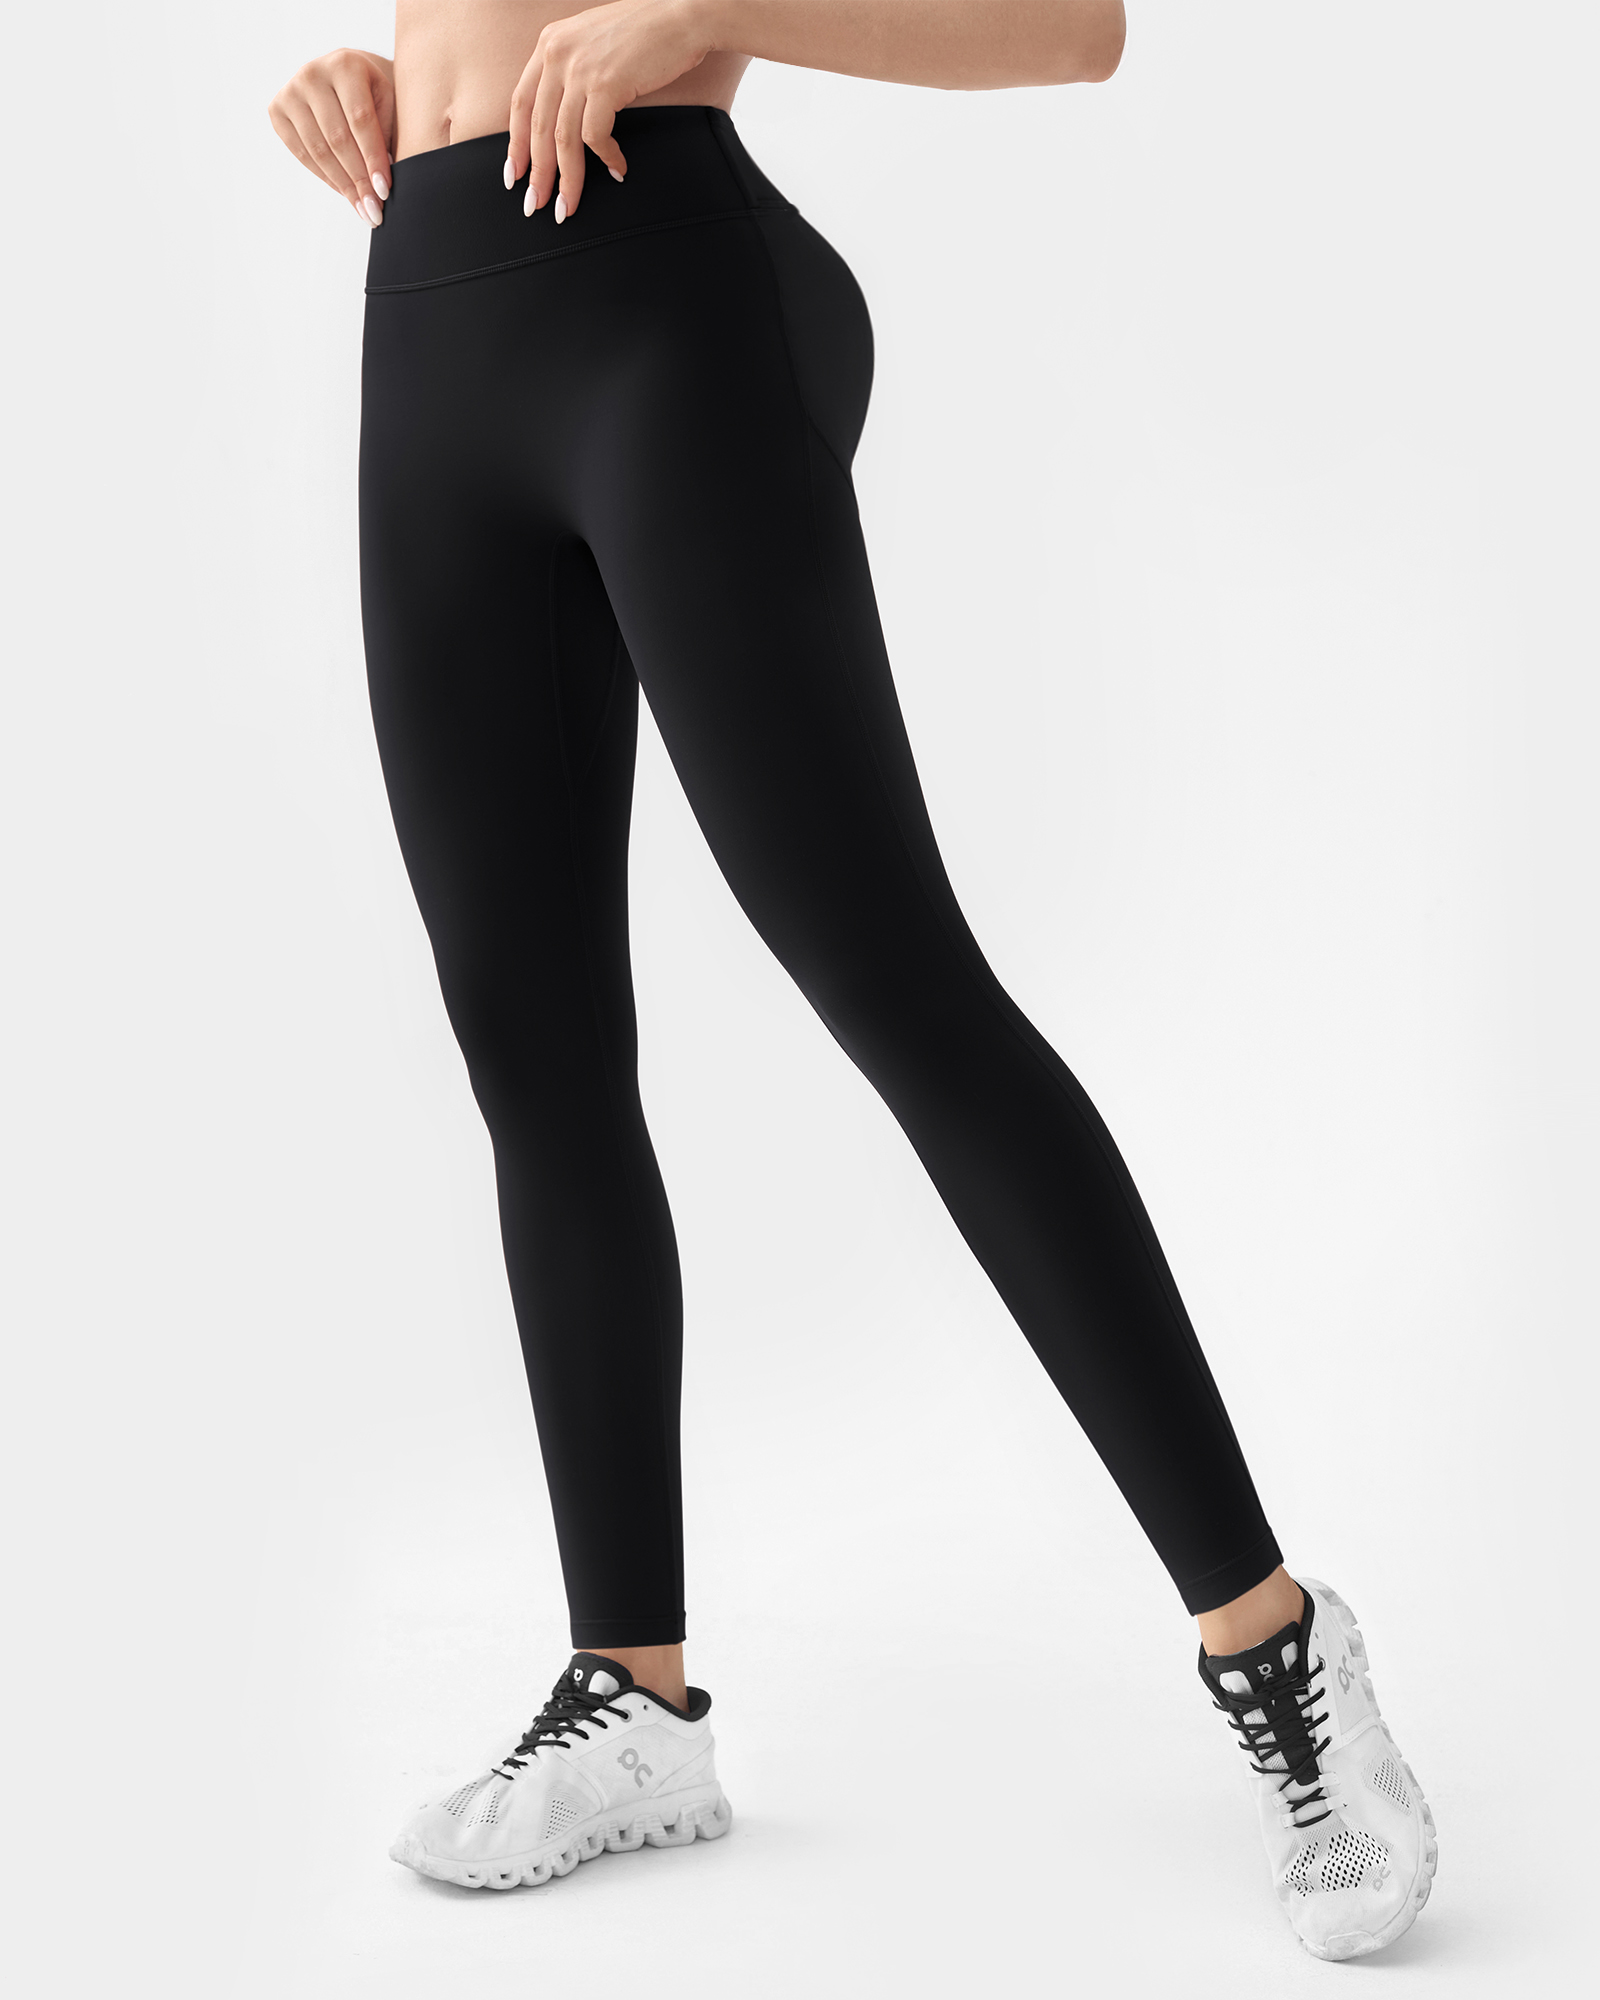 Lace Up Corset Leggings To Highlight Curves - Inspire Uplift